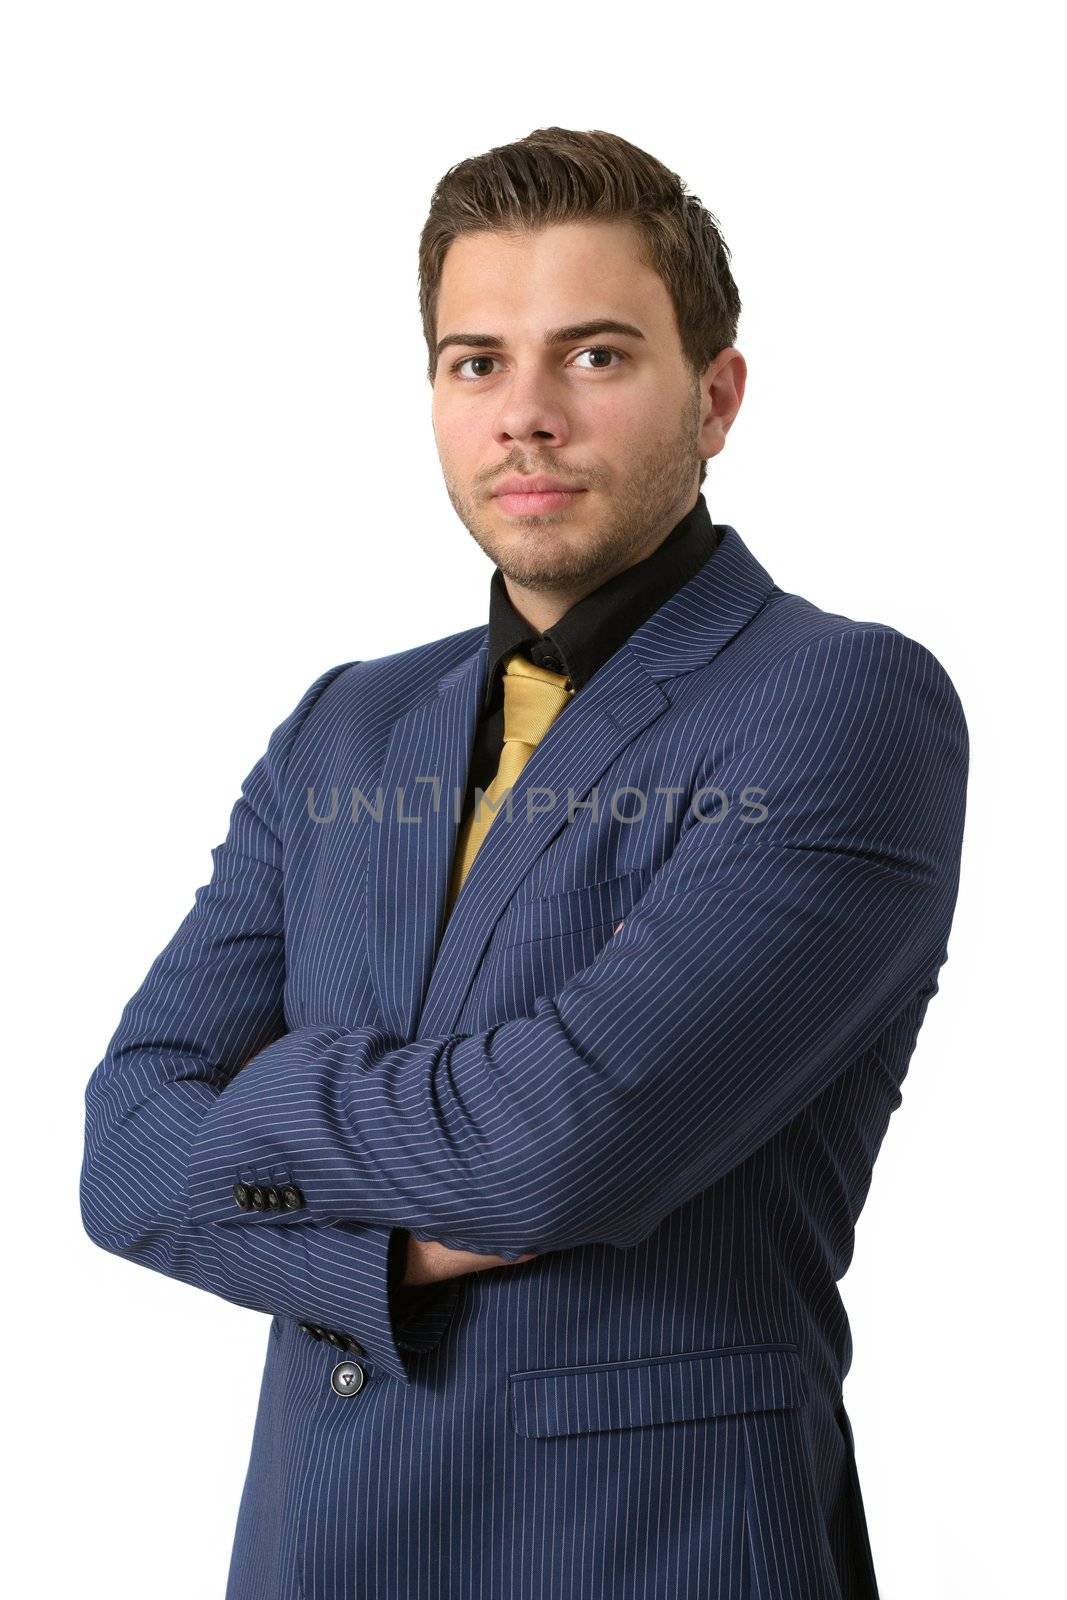 A young strict businessman in a Blue suit with a golden tie